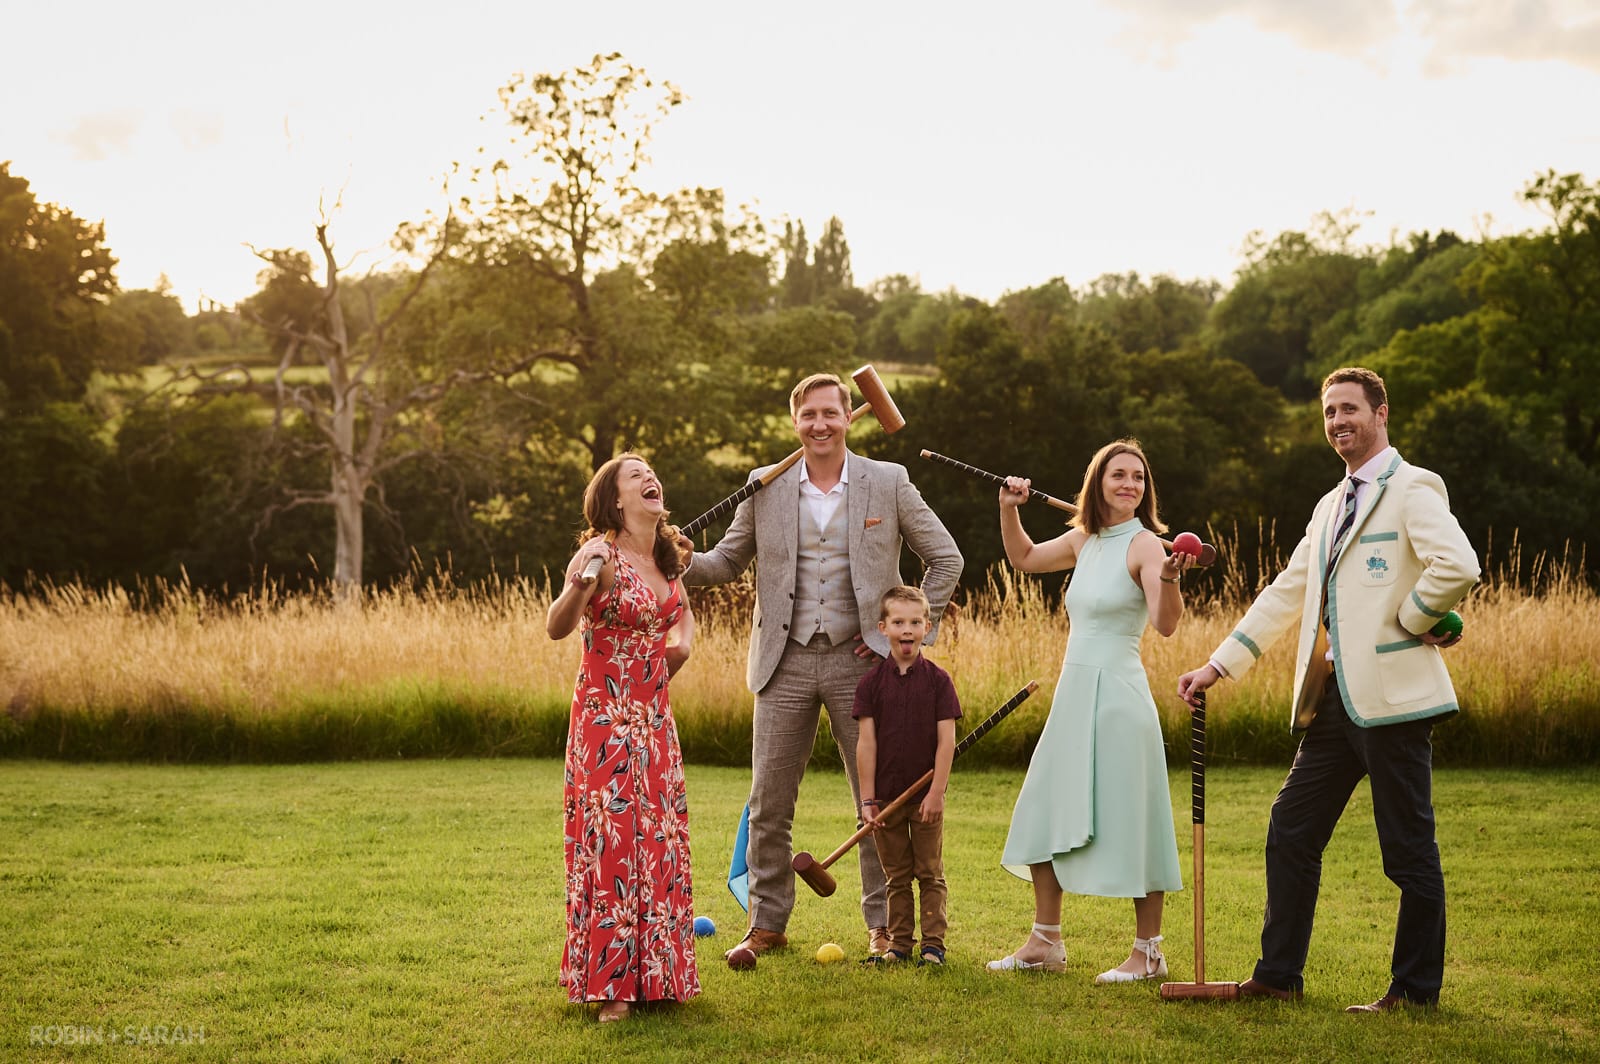 Wedding guests strike a pose with croquet mallets as sun sets behind them